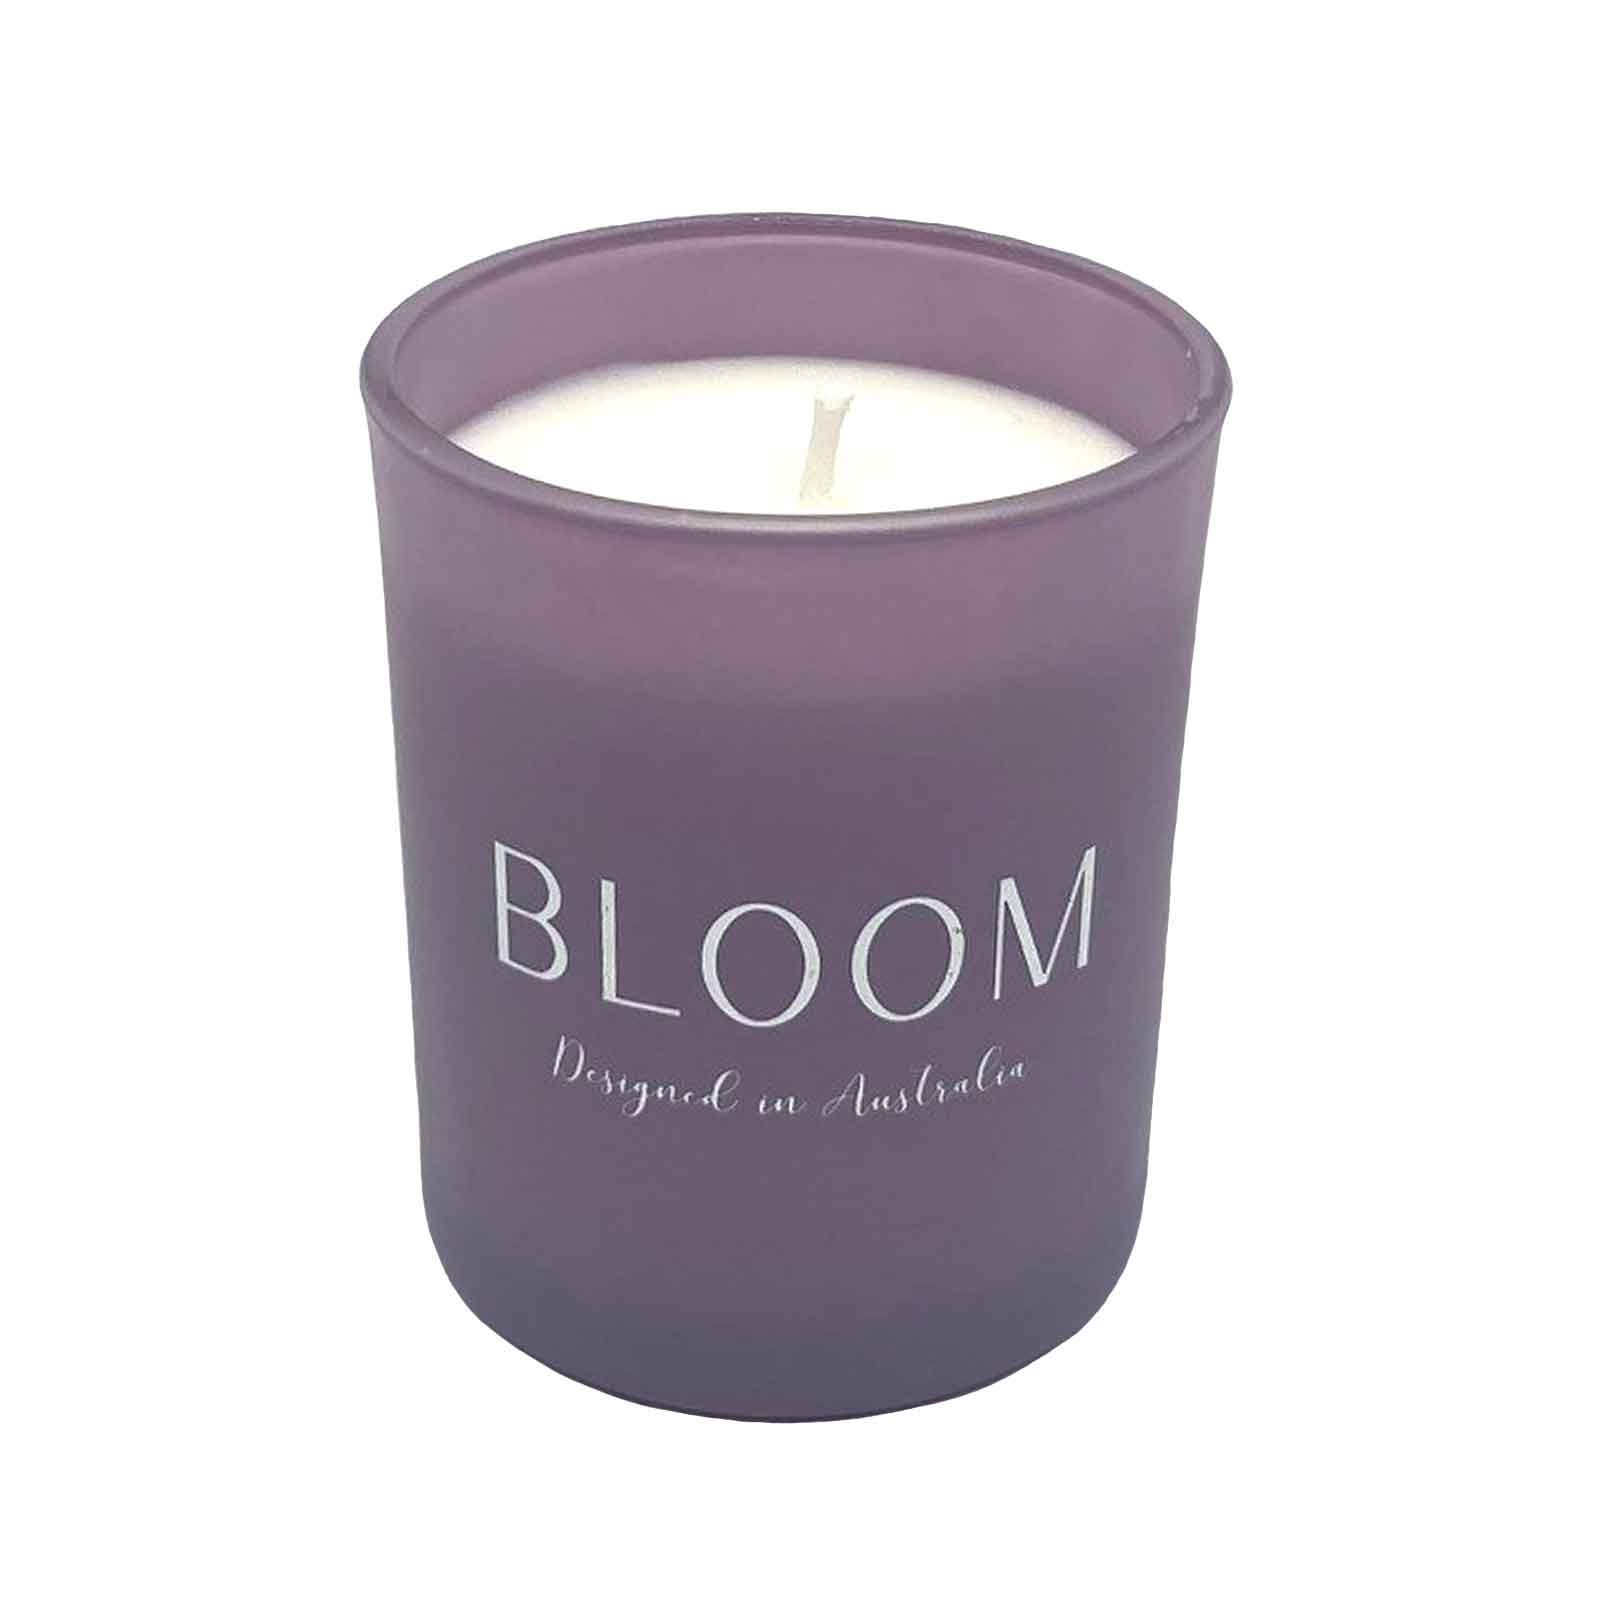 BLOOM Botanical Floral Scented Candle